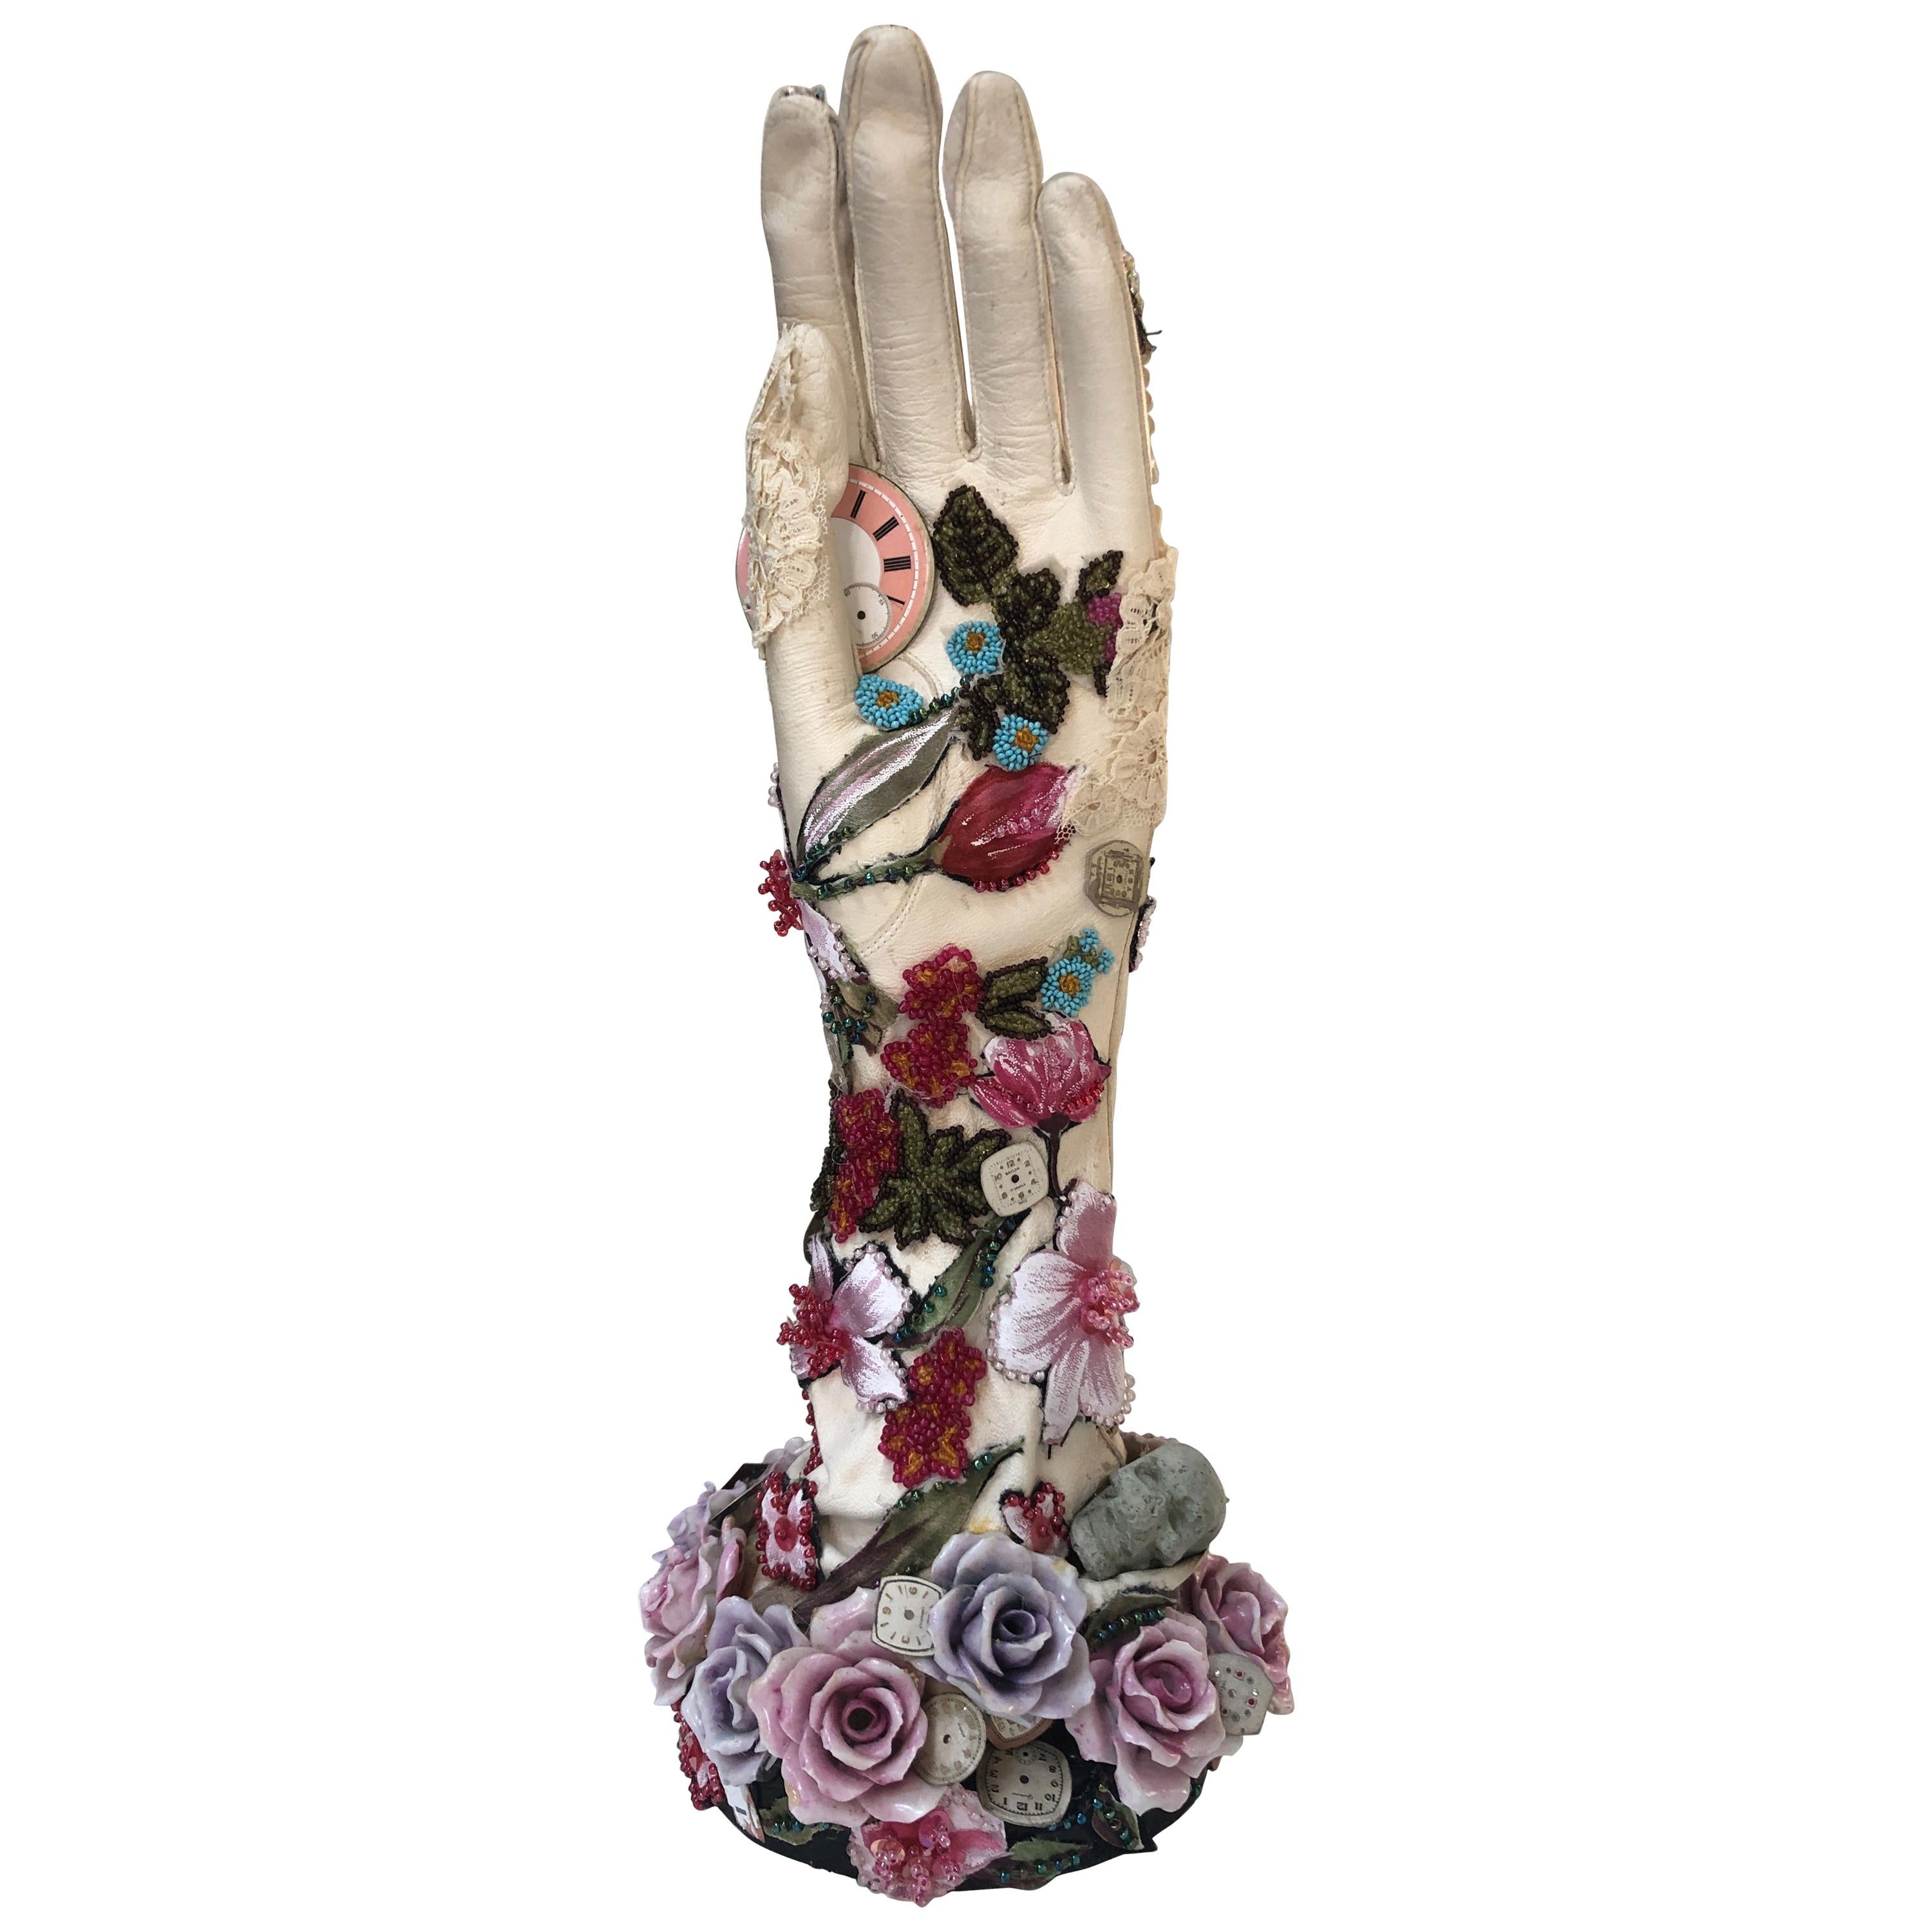 Romantic Mixed-Media Sculpture Titled Hand of Time